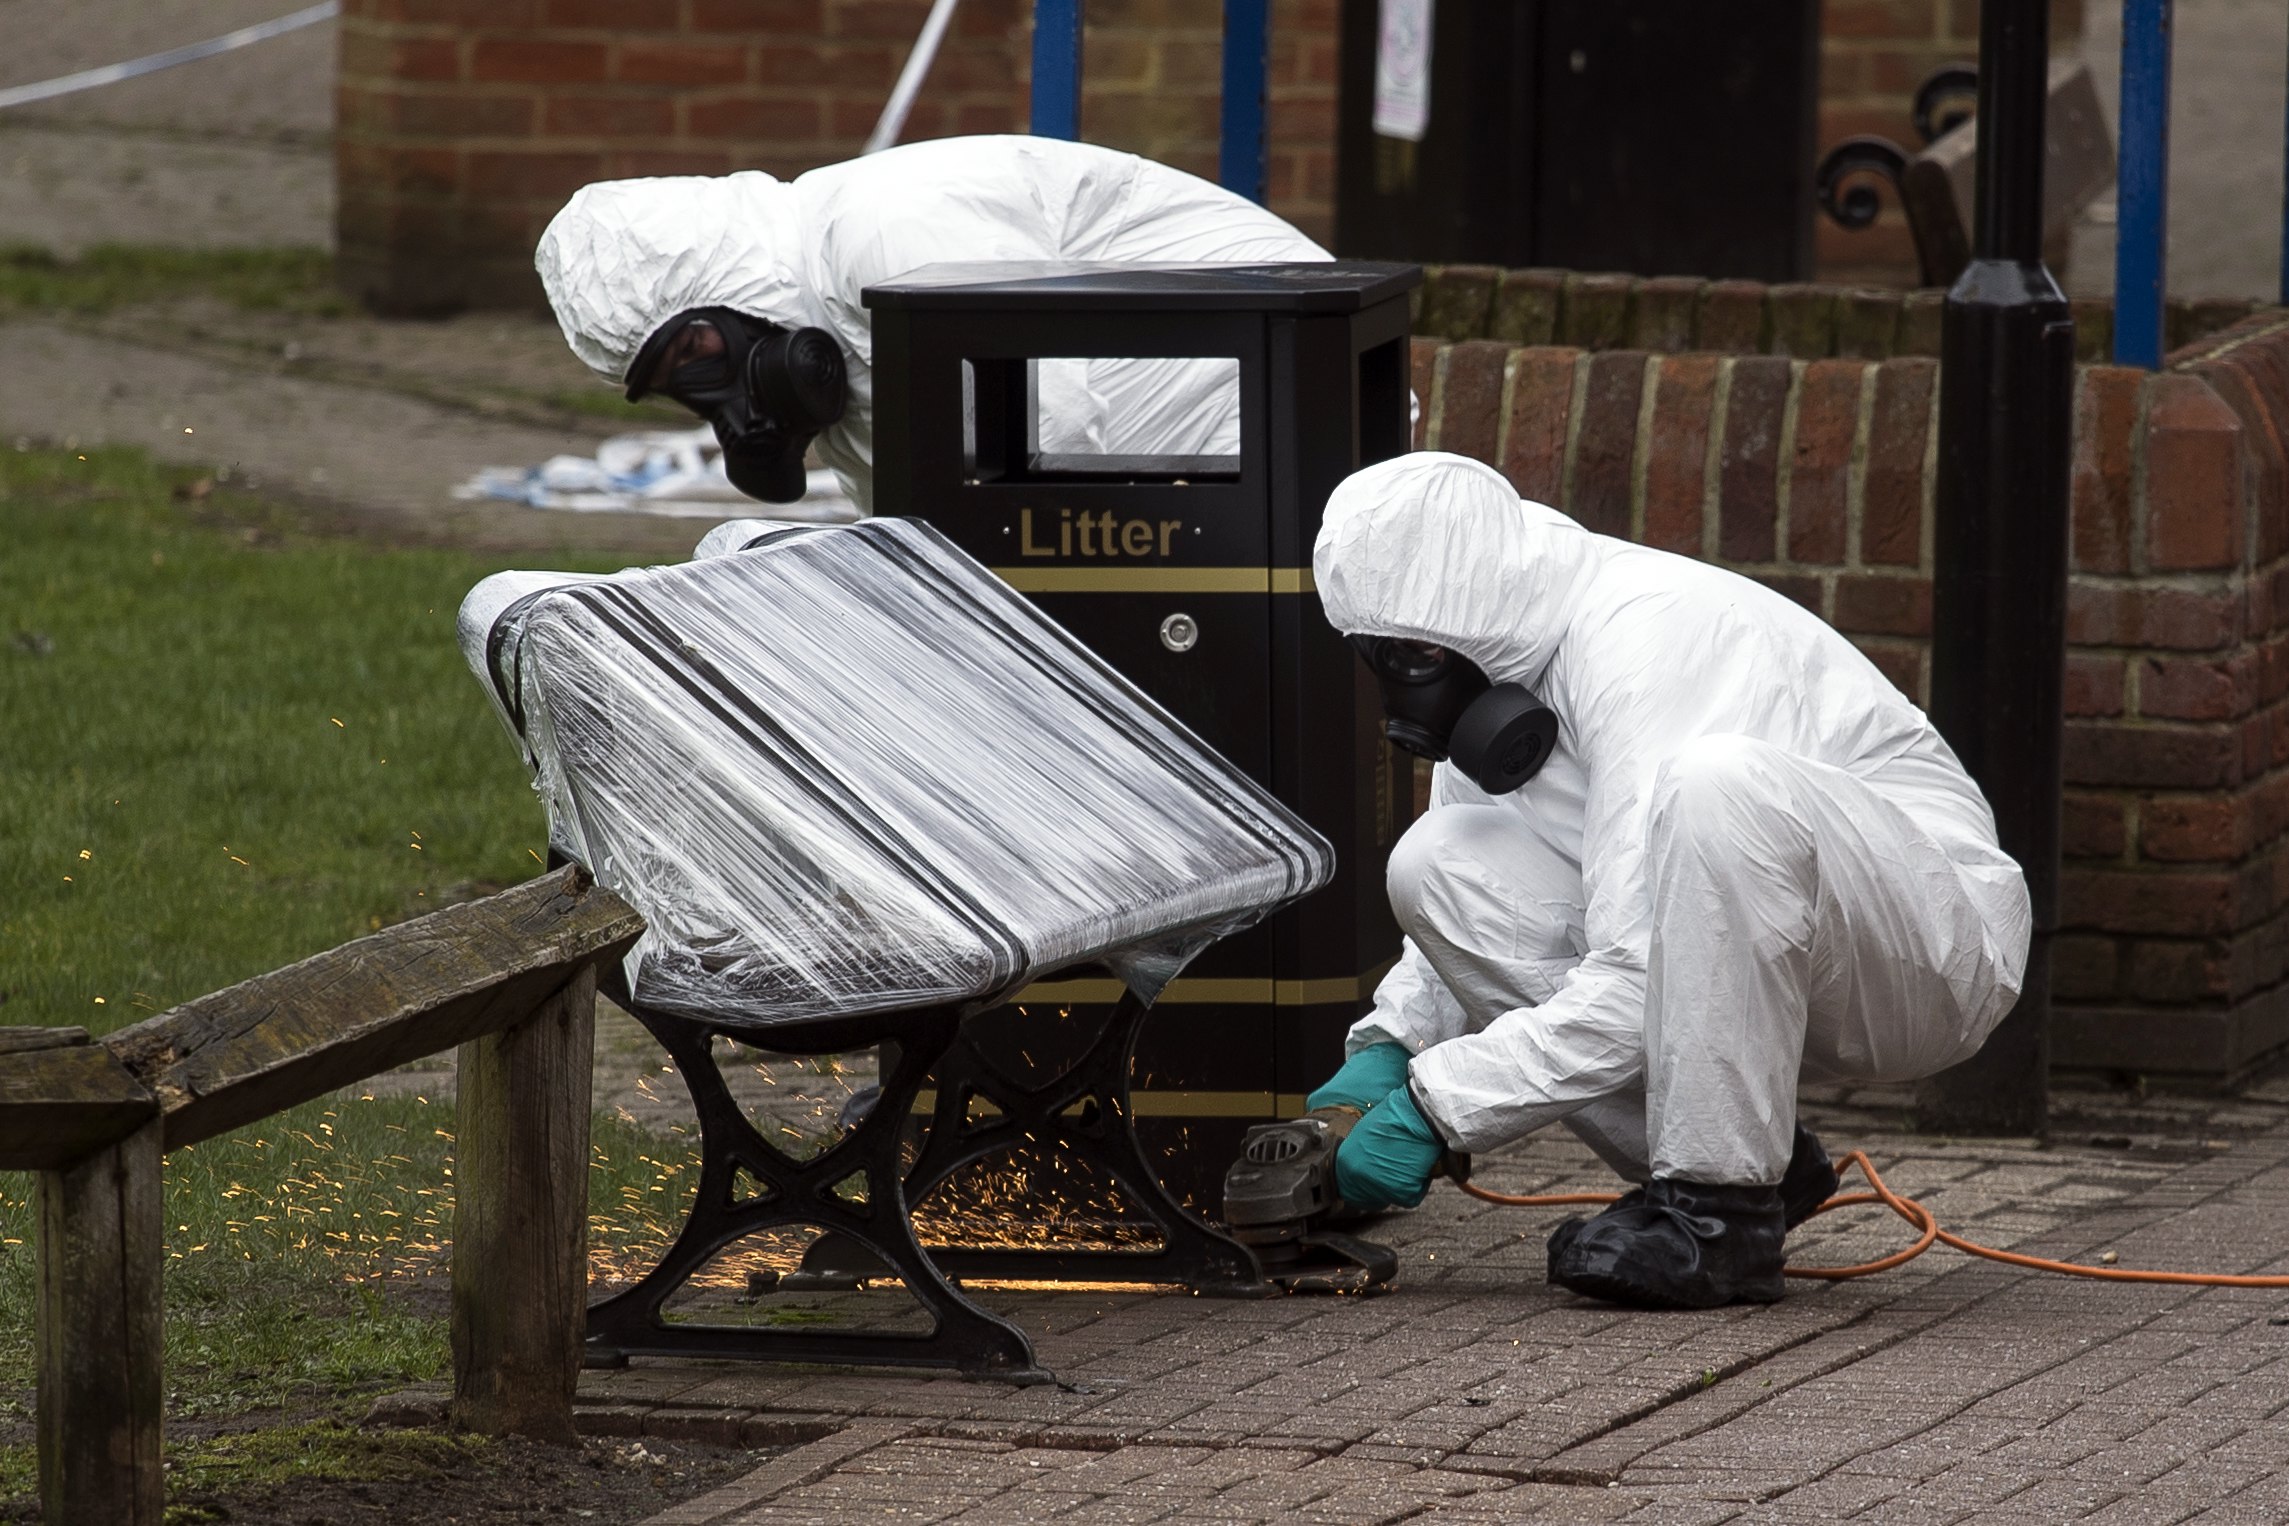 epa06623836 Army officers remove the bench, where Sergi Skripal and his daughter were found, in Salisbury, Wiltshire, Britain, 23 March 2018. Former Russian spy Sergei Skripal, who lived in Salisbury and his daughter Yulia were found suffering from extreme exposure to a rare nerve agent in Salisbury on 04 March 2018. Skripal and his daughter Yulia remain in a 'very serious' condition.  EPA/WILL OLIVER